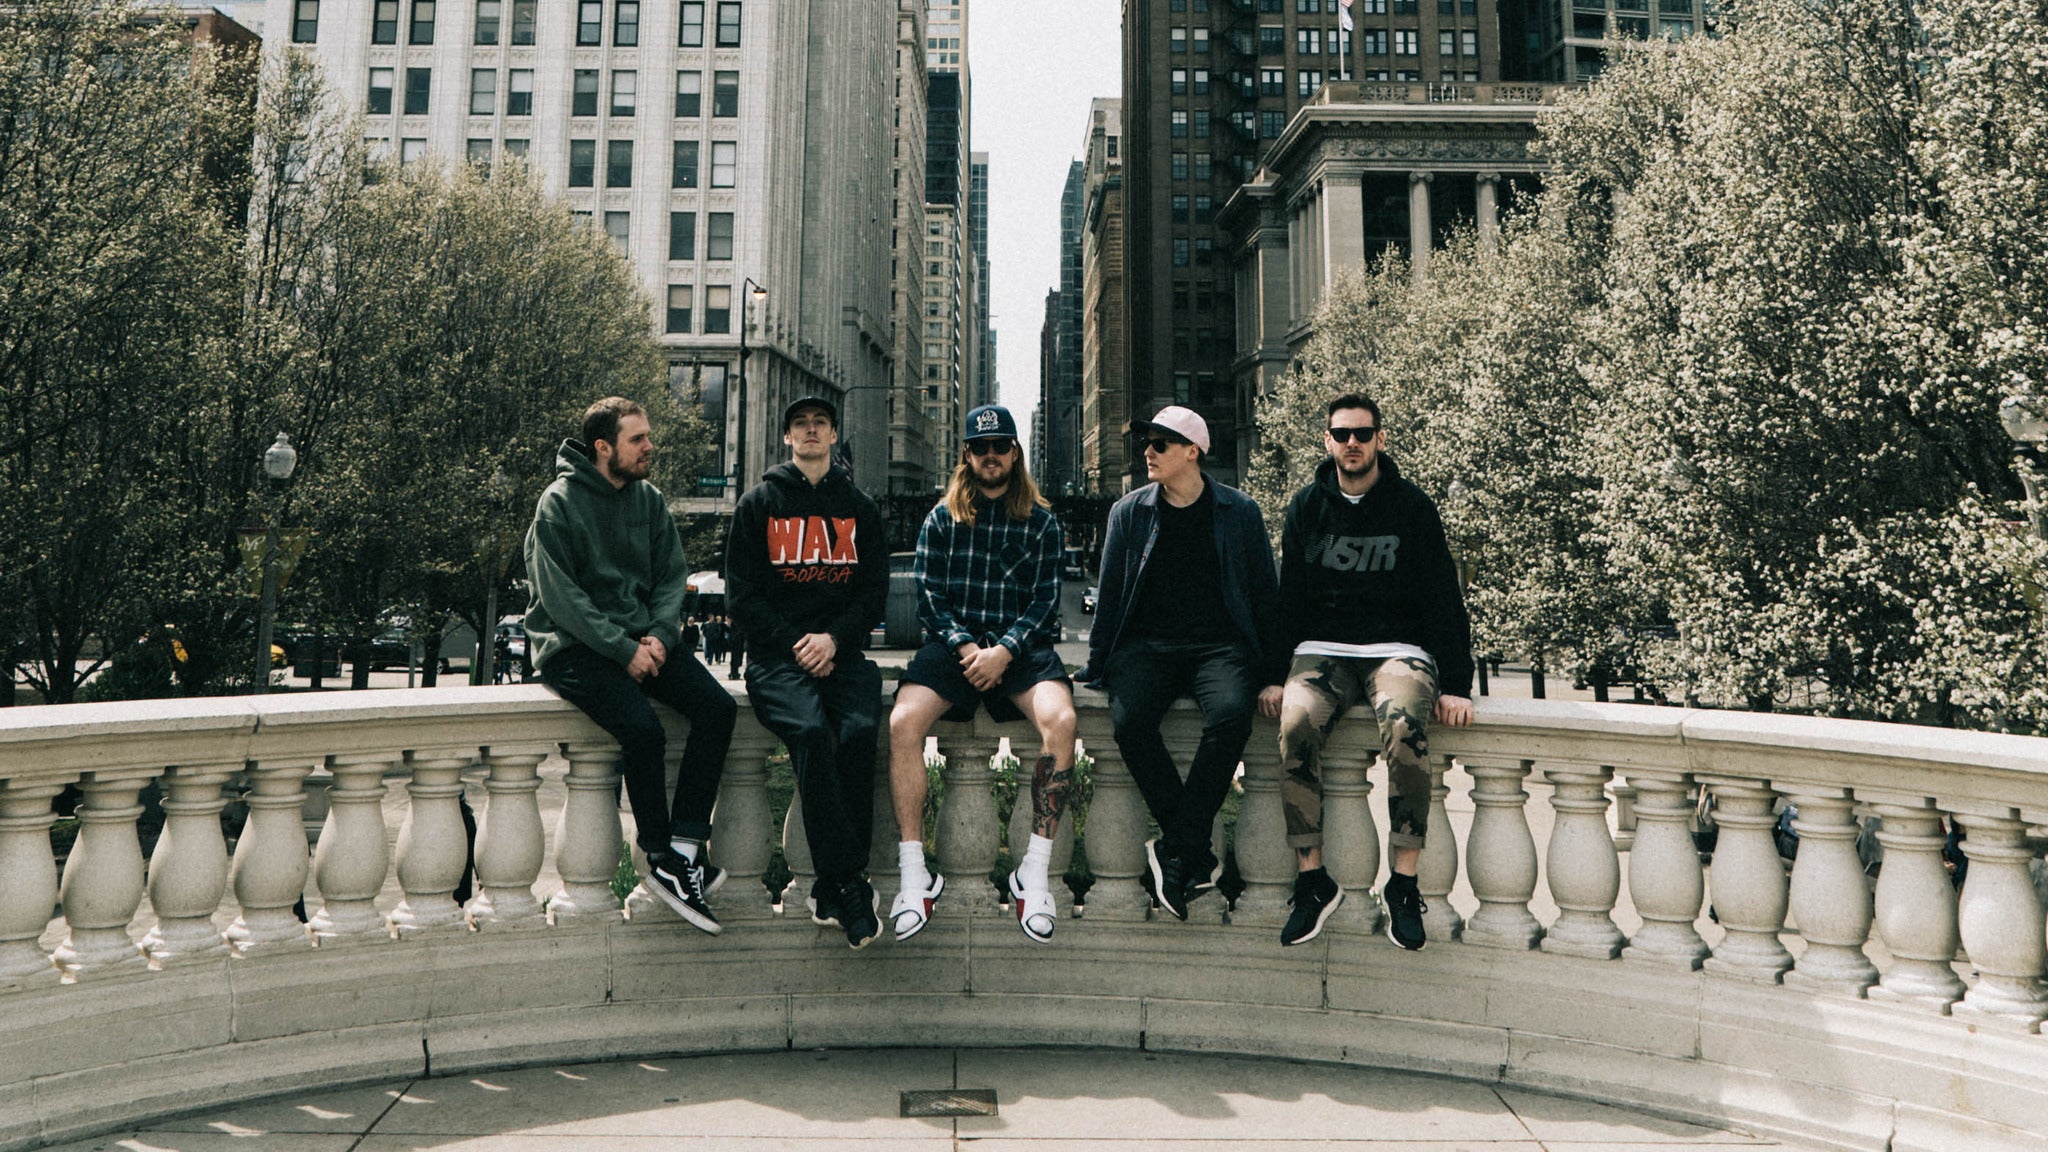 STAND ATLANTIC w/ Special Guests Trash Boat, Super Whatevr+Jetty Bones in Pittsburgh promo photo for Citi® Cardmember Preferred presale offer code